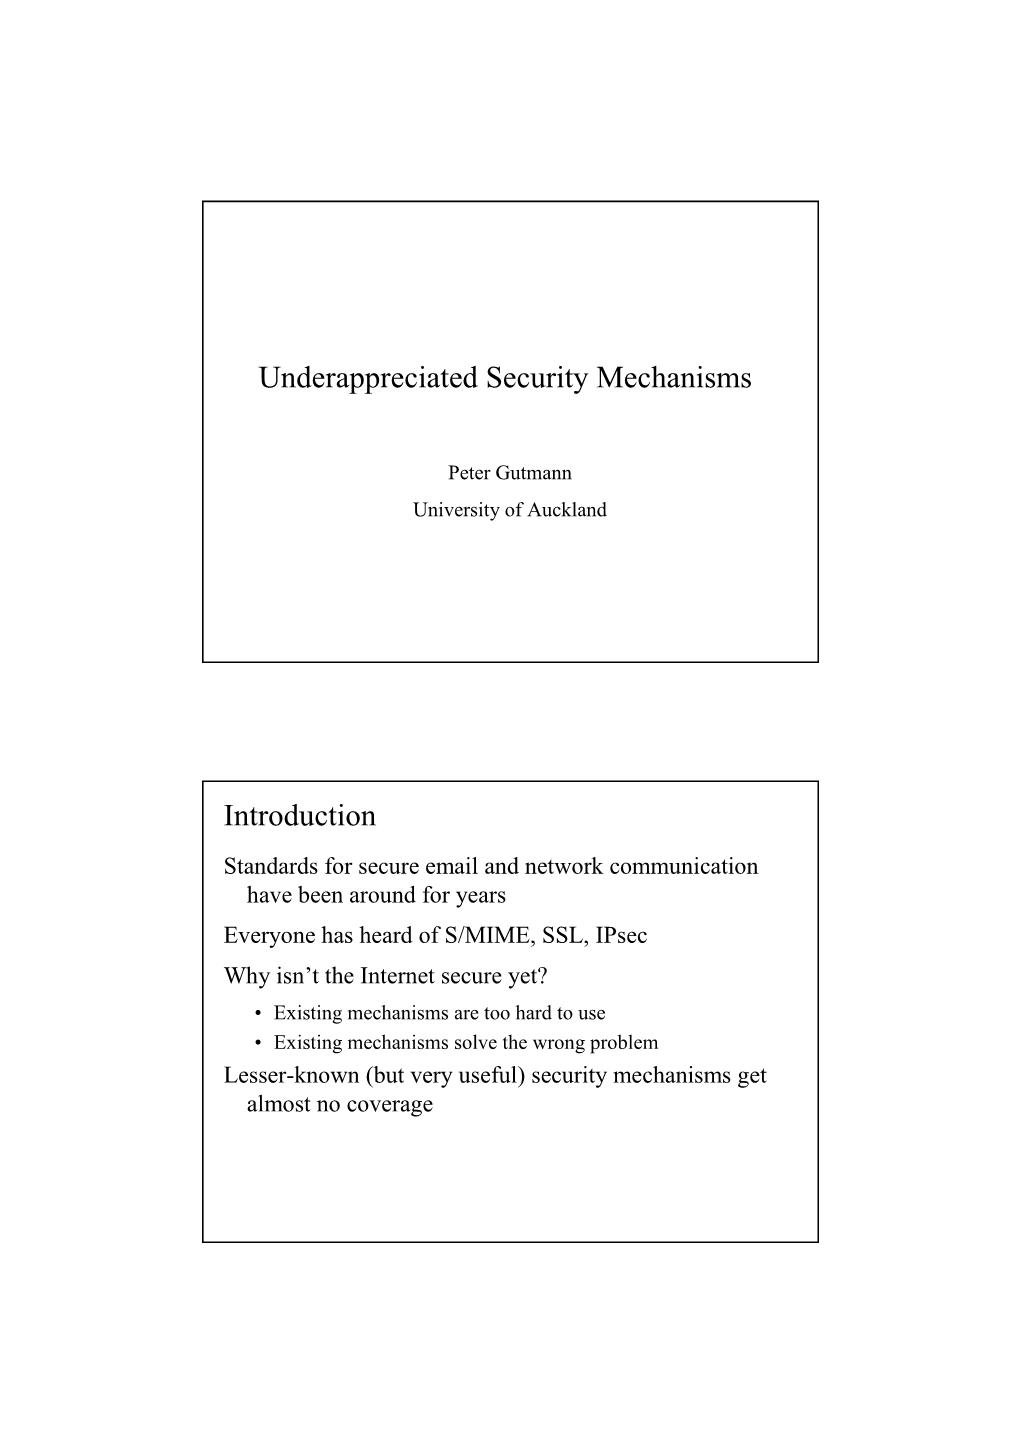 Underappreciated Security Mechanisms Introduction